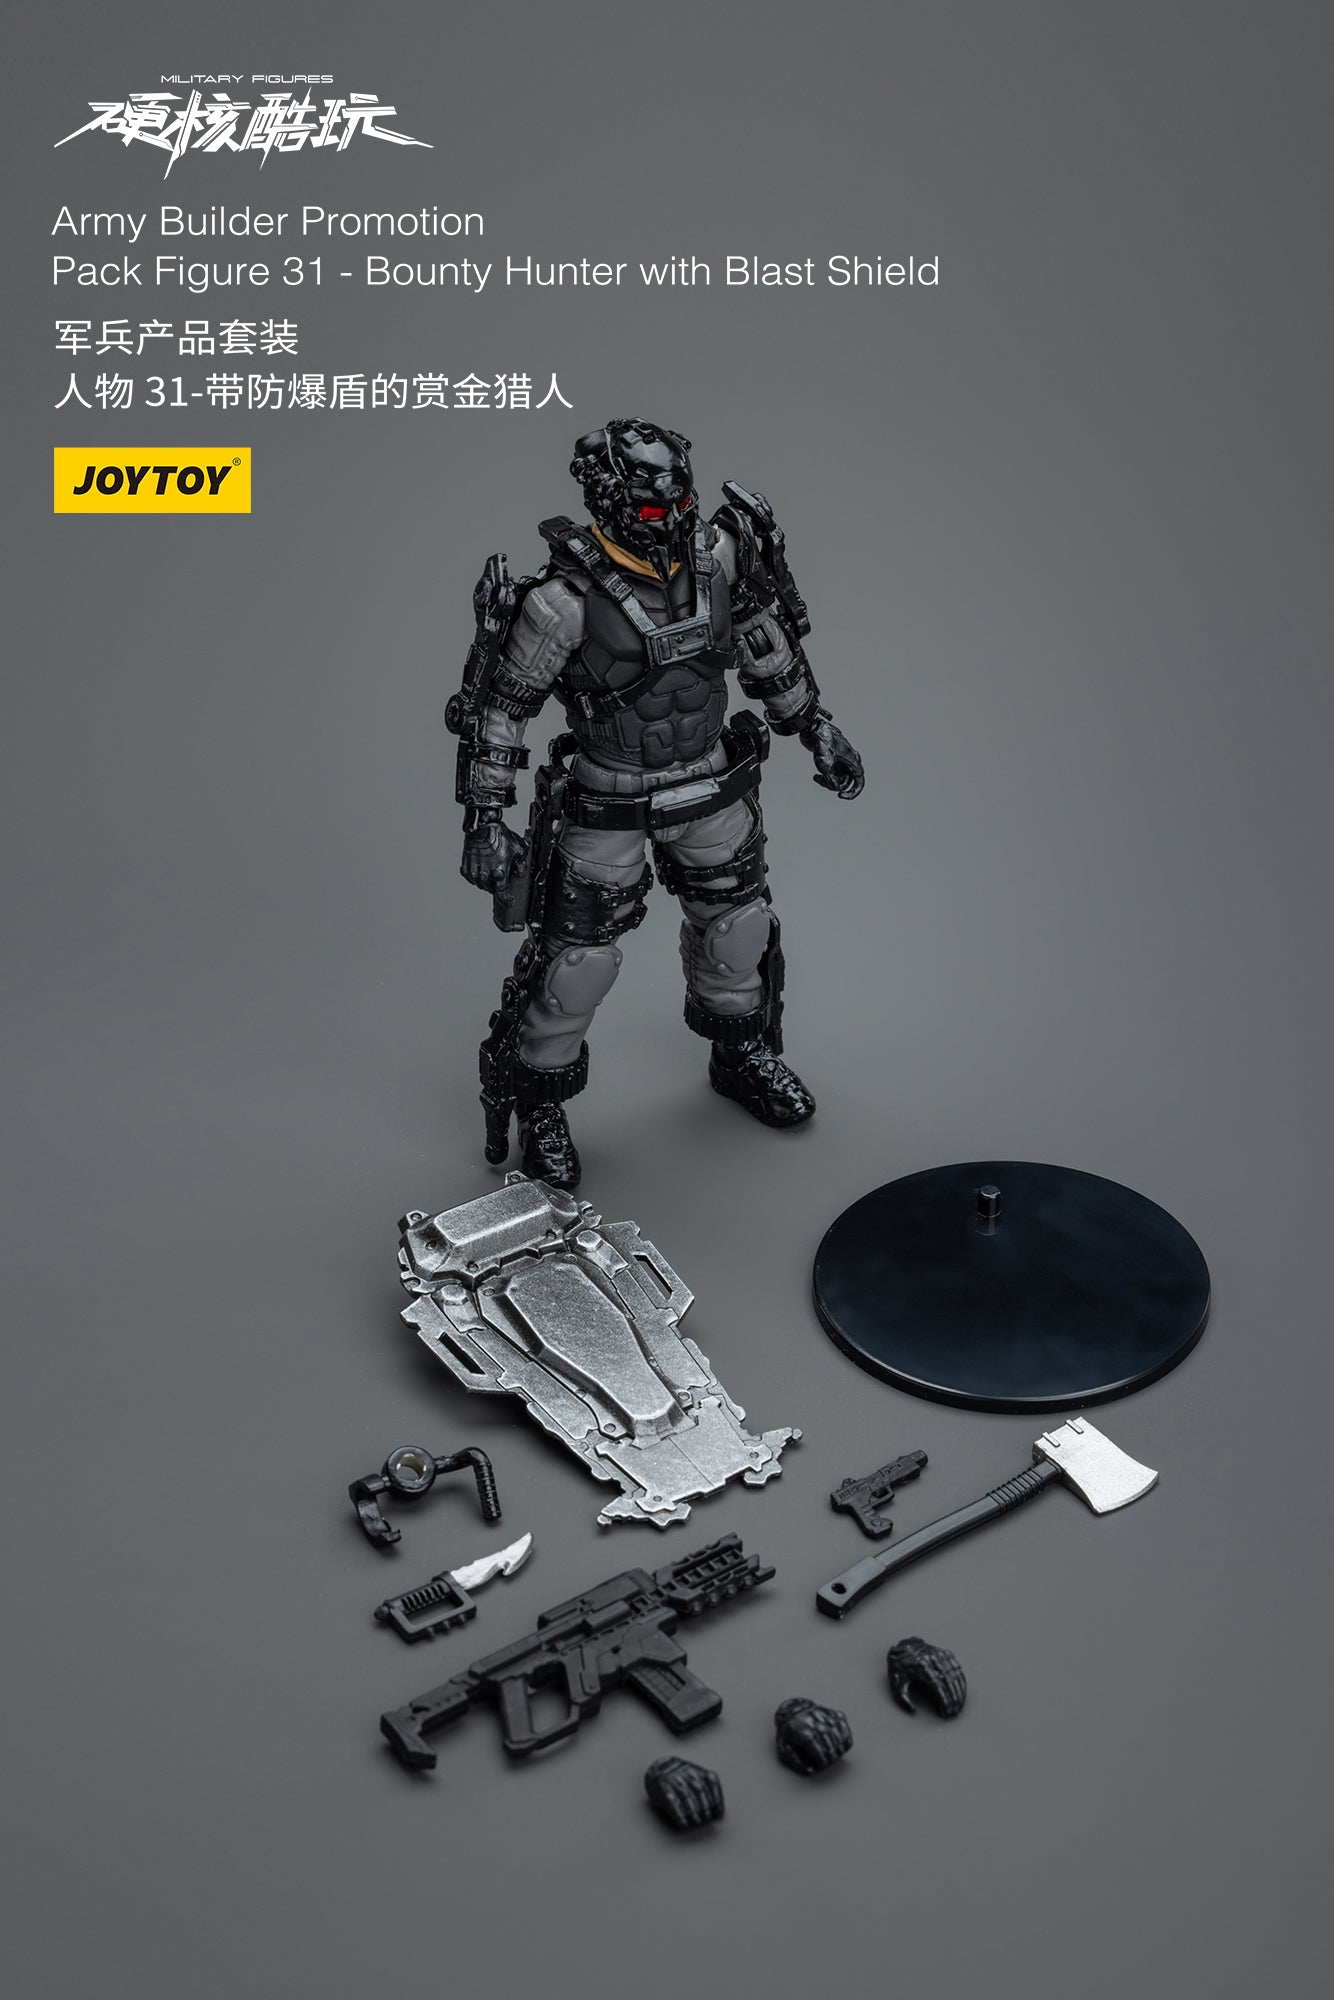 Army Builder Promotion Pack Figure 31 - Bounty Hunter with Blast Shield- Soldiers Action Figure By JOYTOY